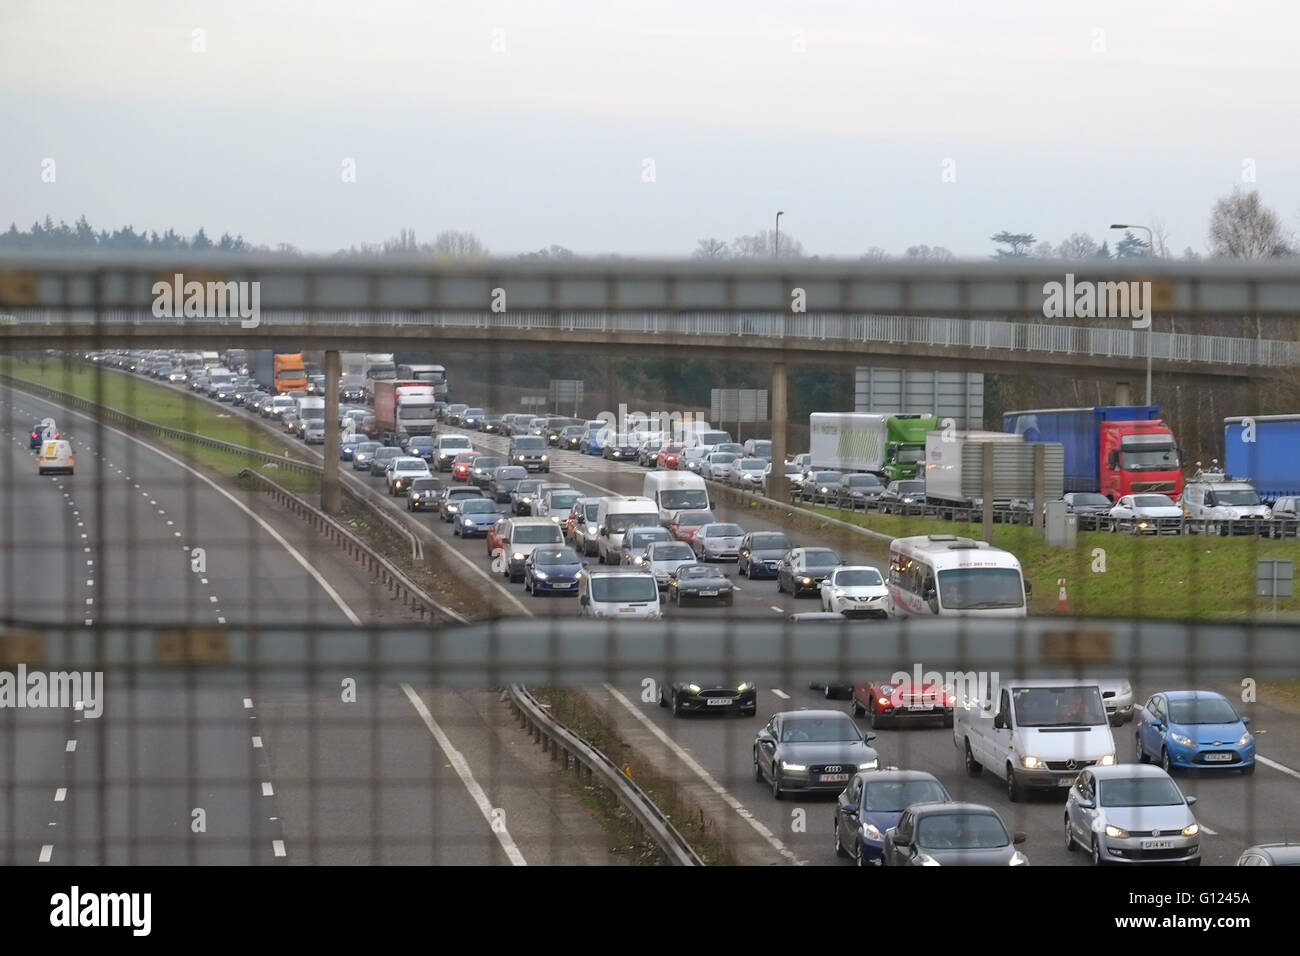 Traffic jam due to an accident on the northbound M40 motorway in Warwickshire, England. Stock Photo